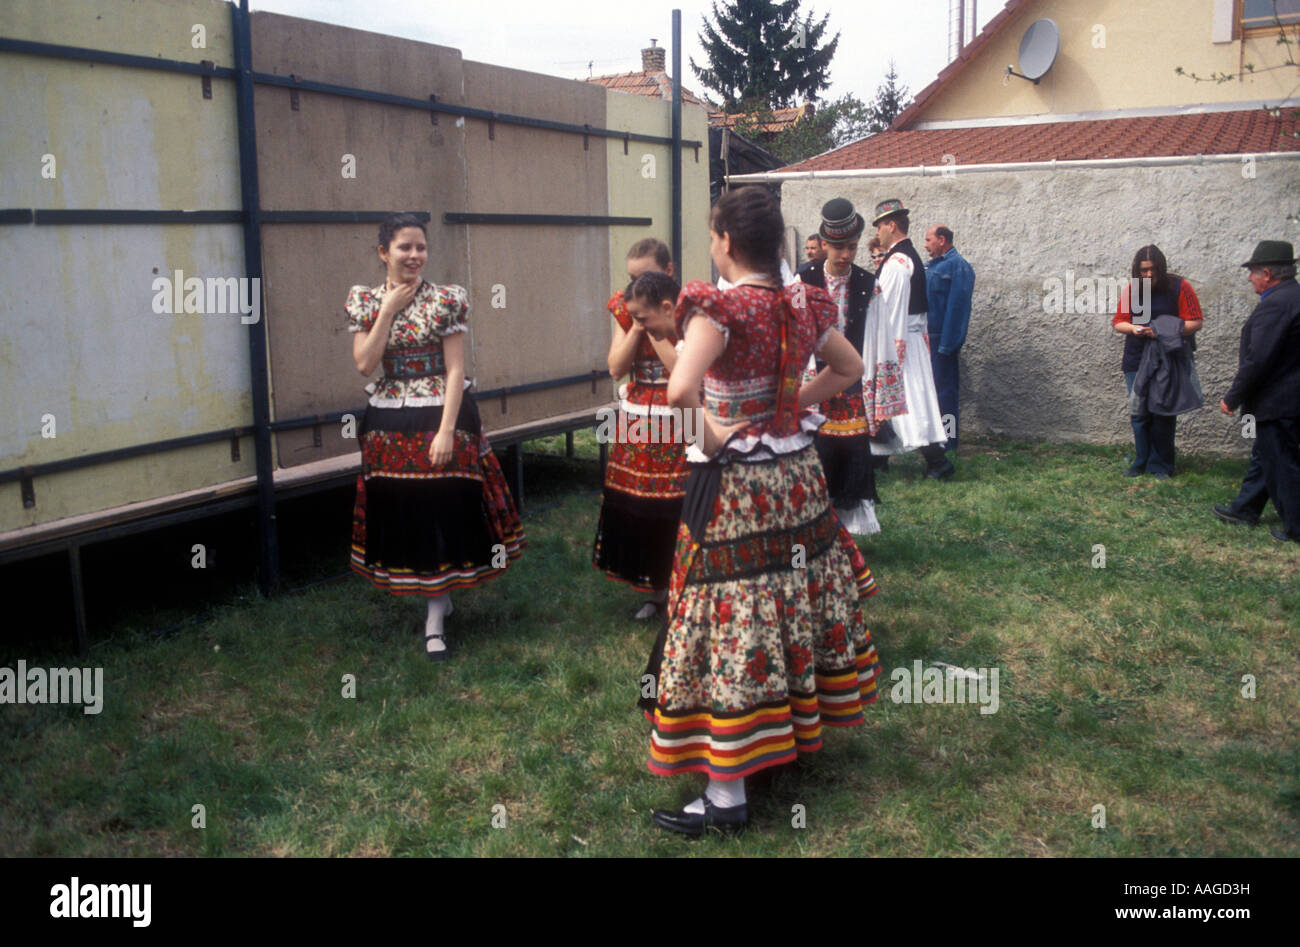 Girls in traditional dress, backstage at a dance performance during the Matyo Easter festival in Mezokovesd, Hungary Stock Photo